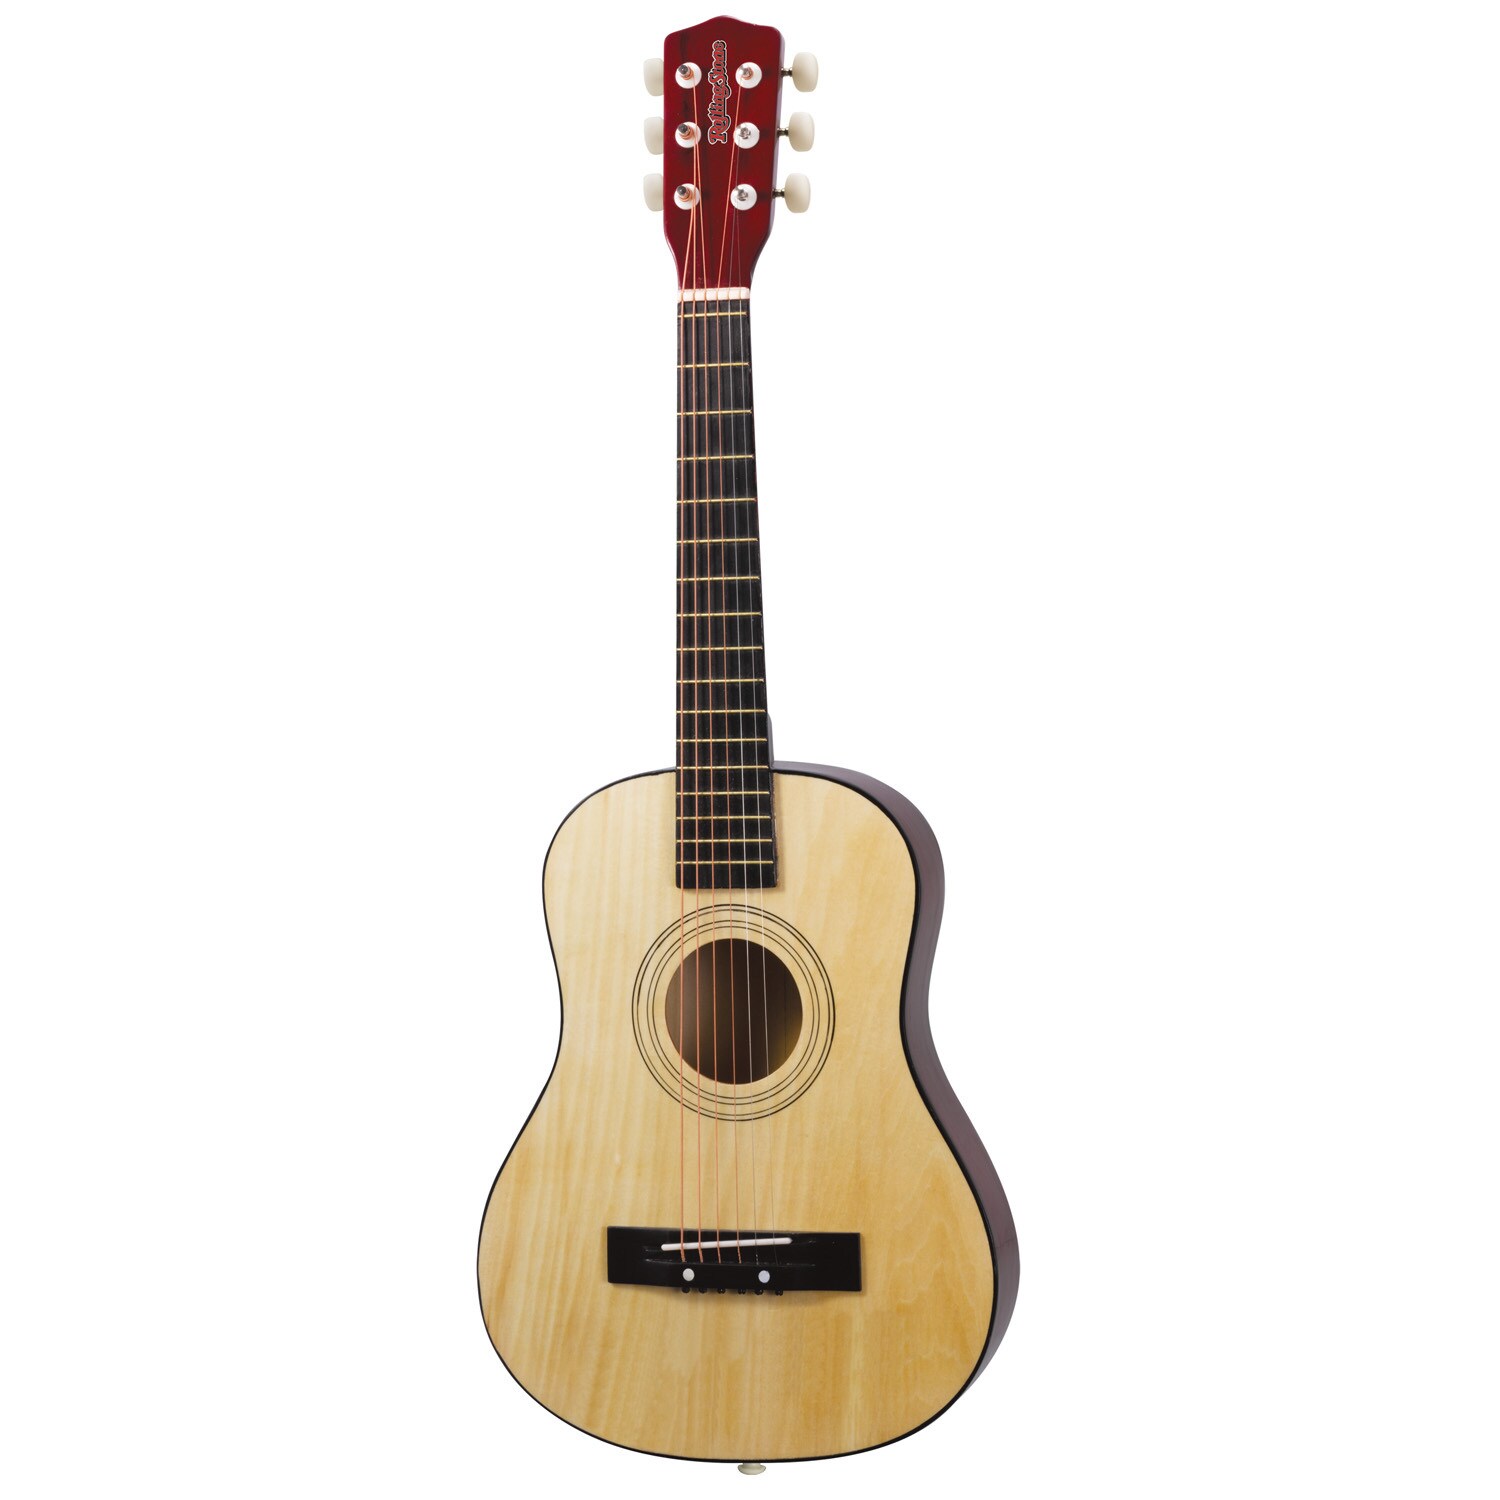 Rolling Stone 30 inch Acoustic Guitar